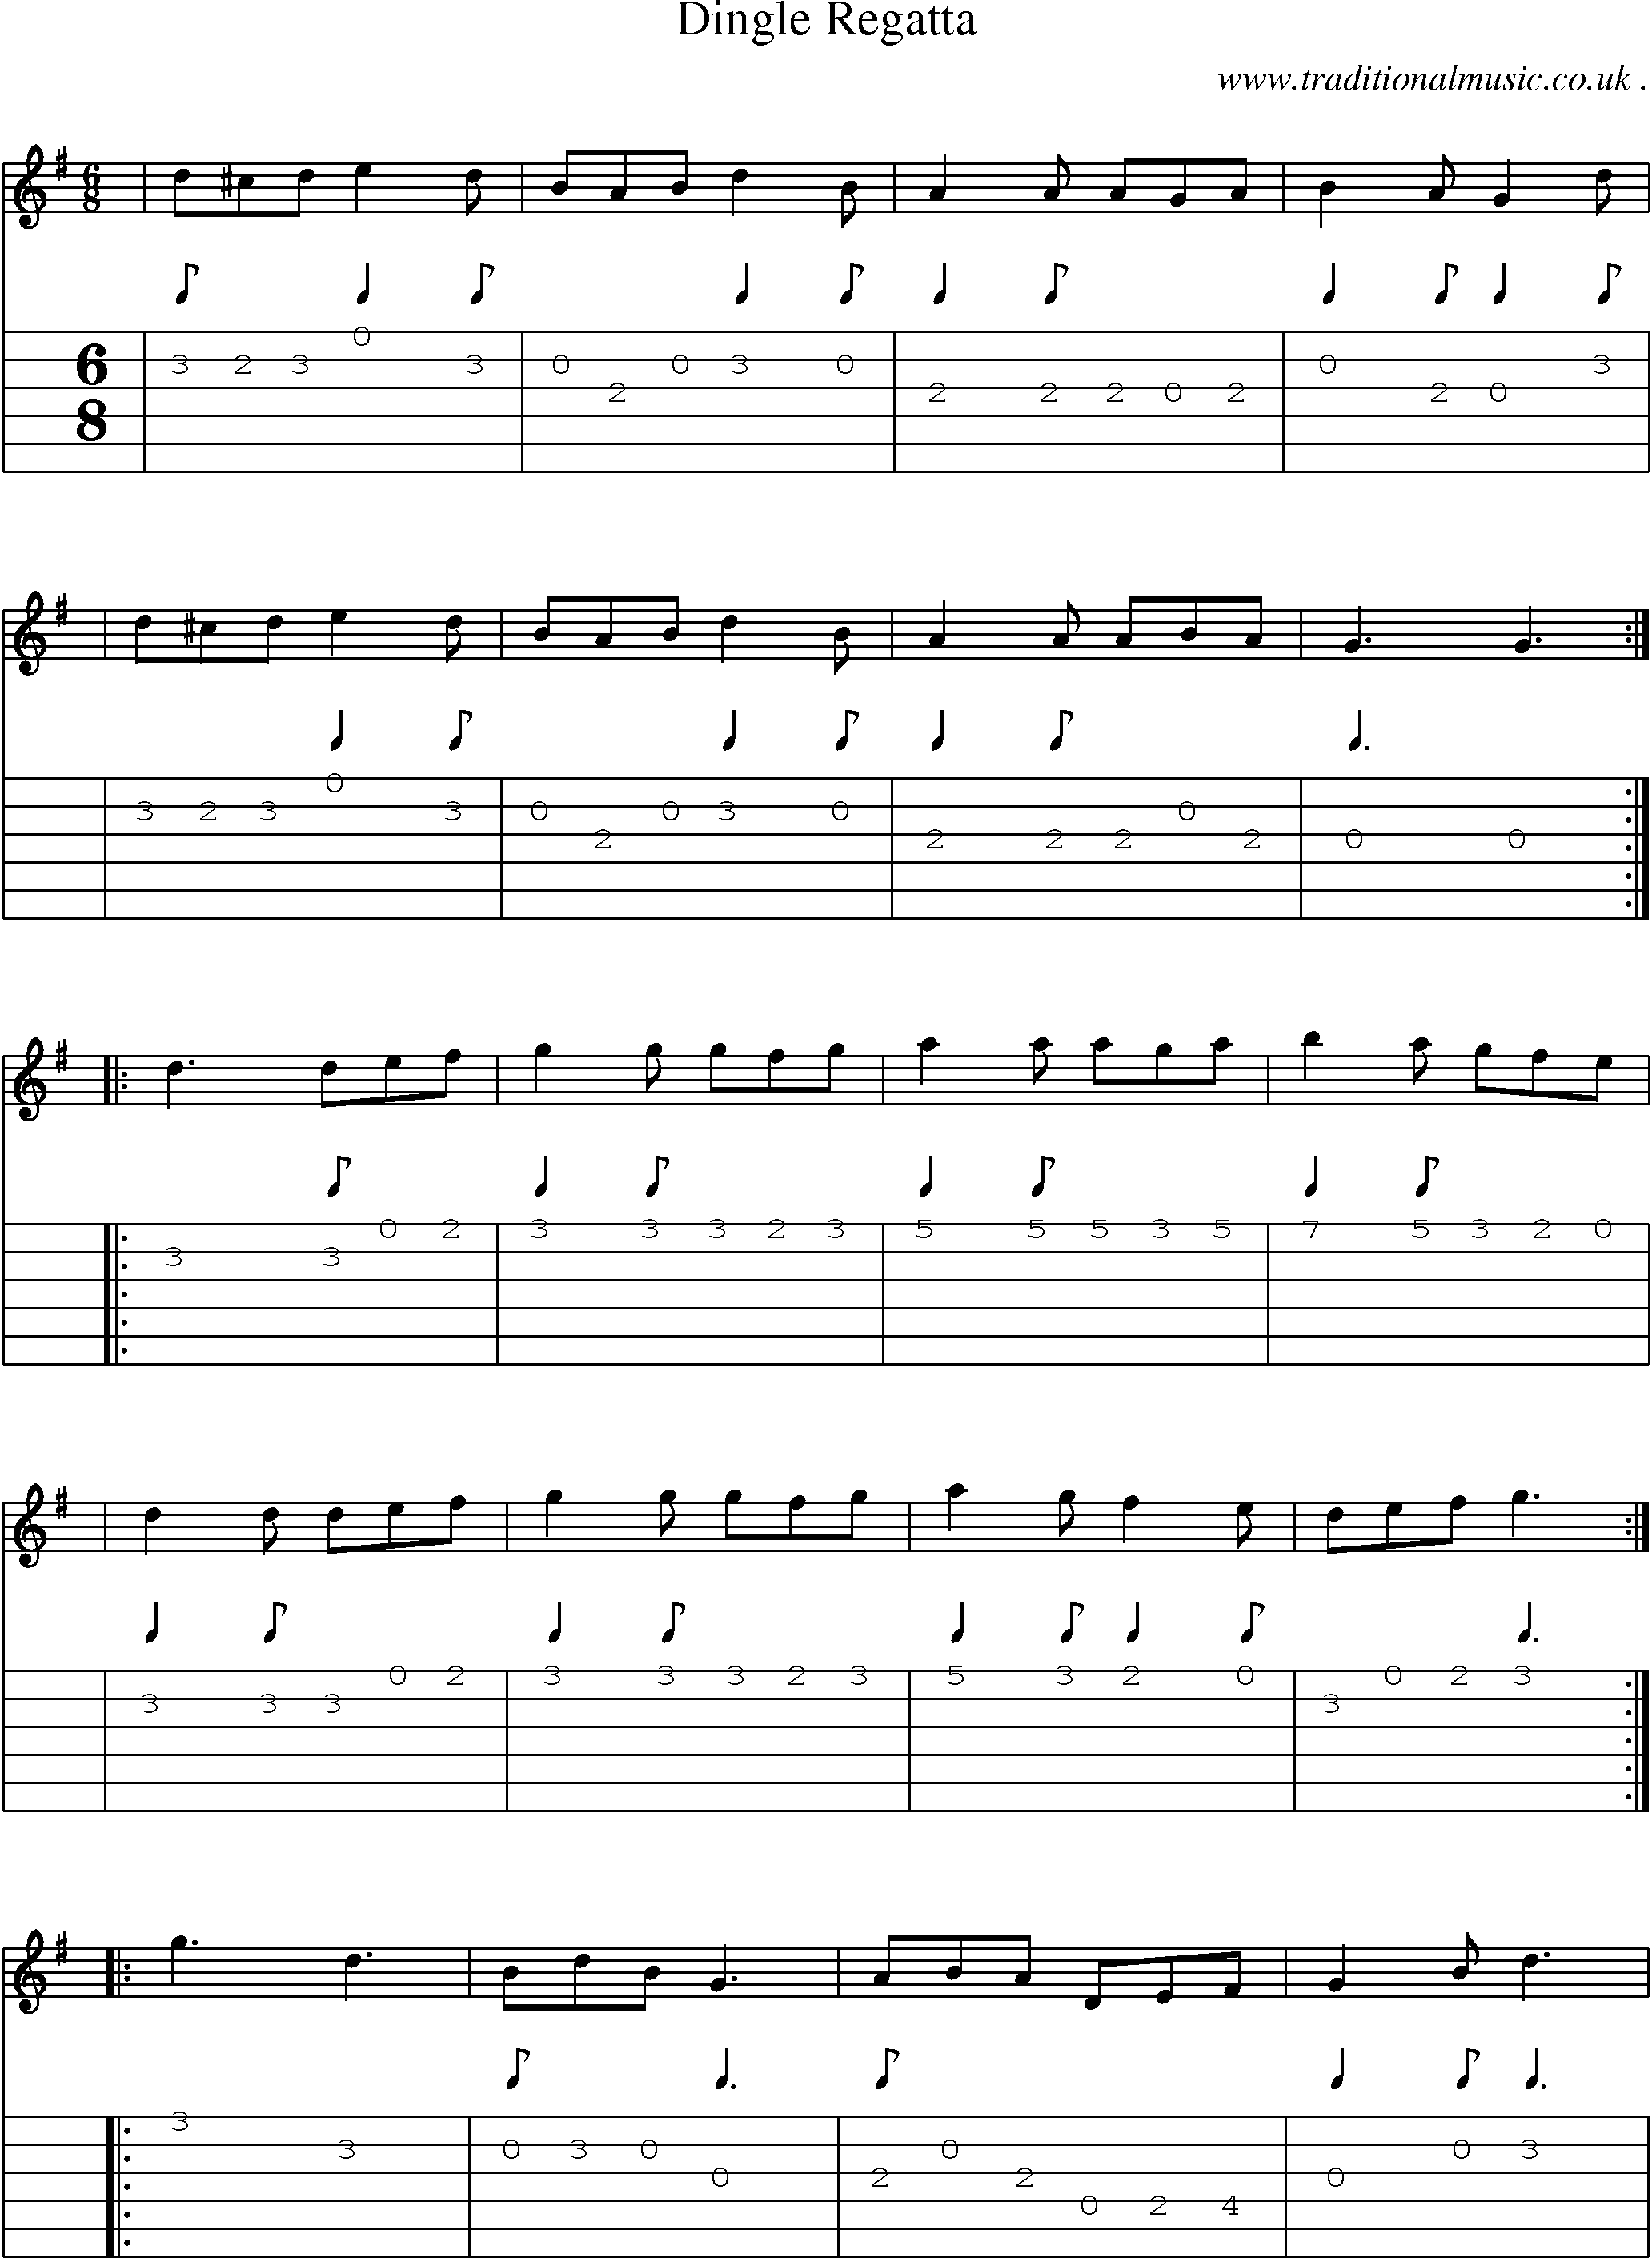 Sheet-Music and Guitar Tabs for Dingle Regatta